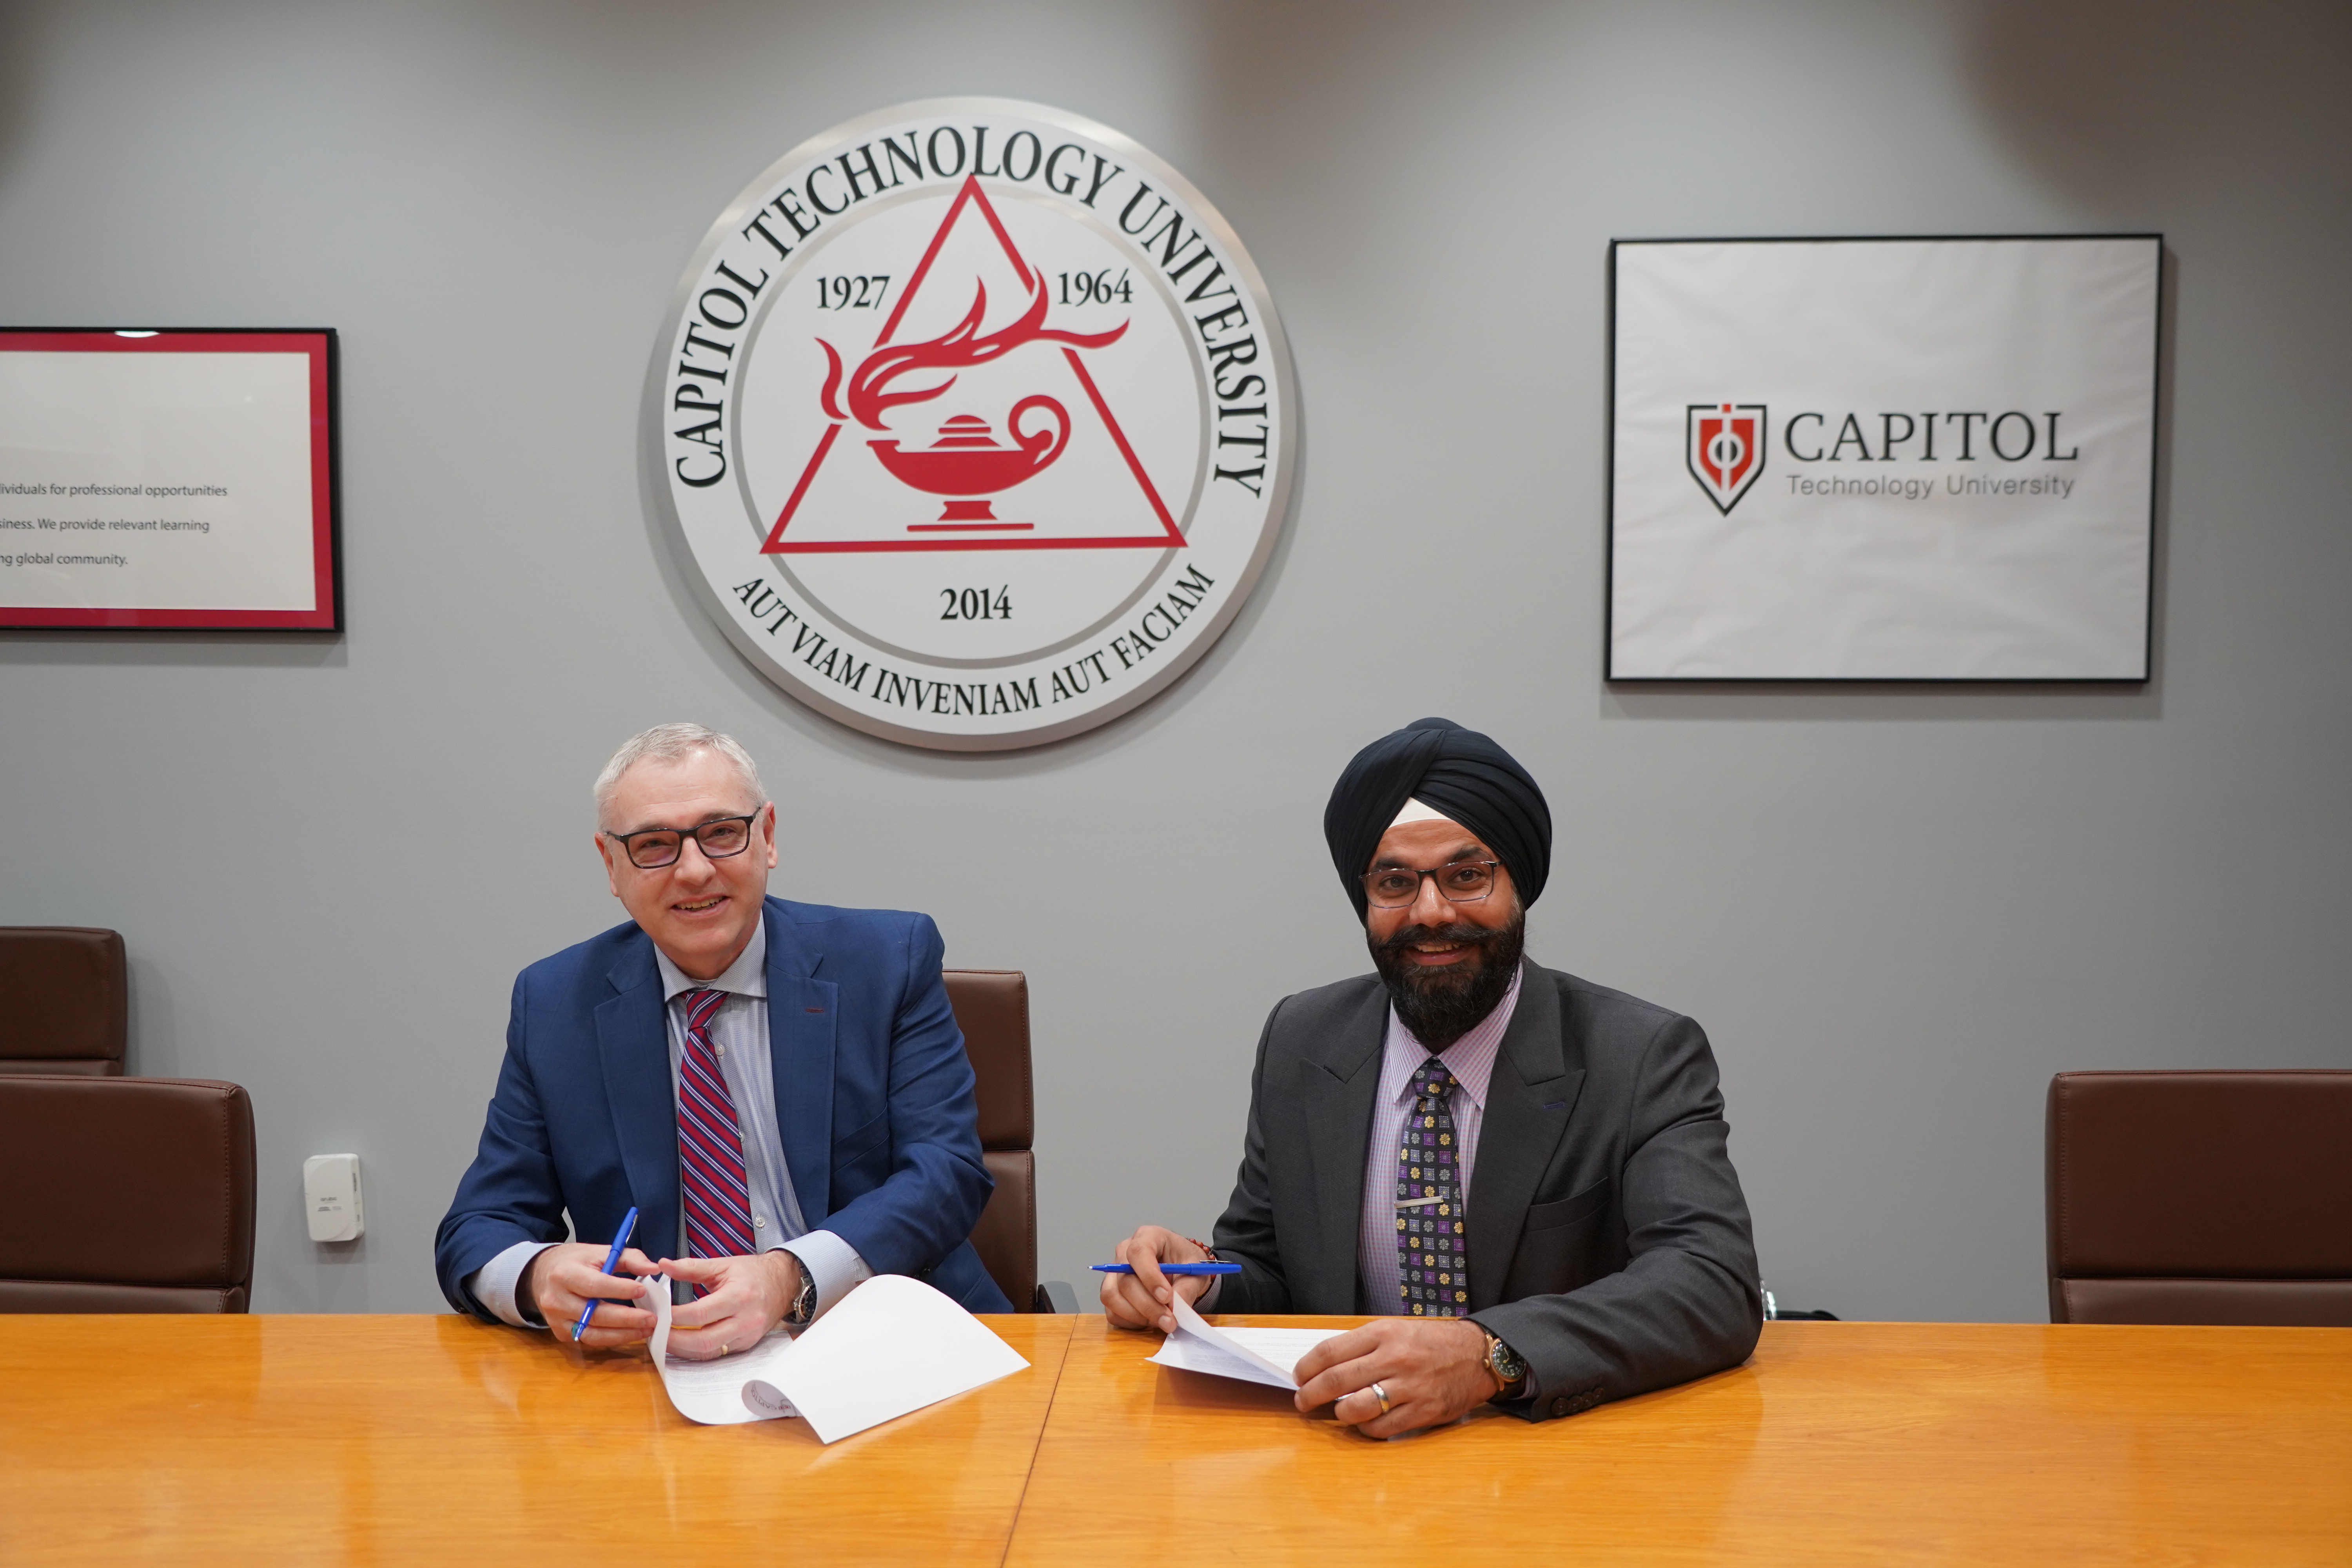 Bradford Sims of Capitol Tech and Gurpreet Singh of Infotrend signing an M.O.U.